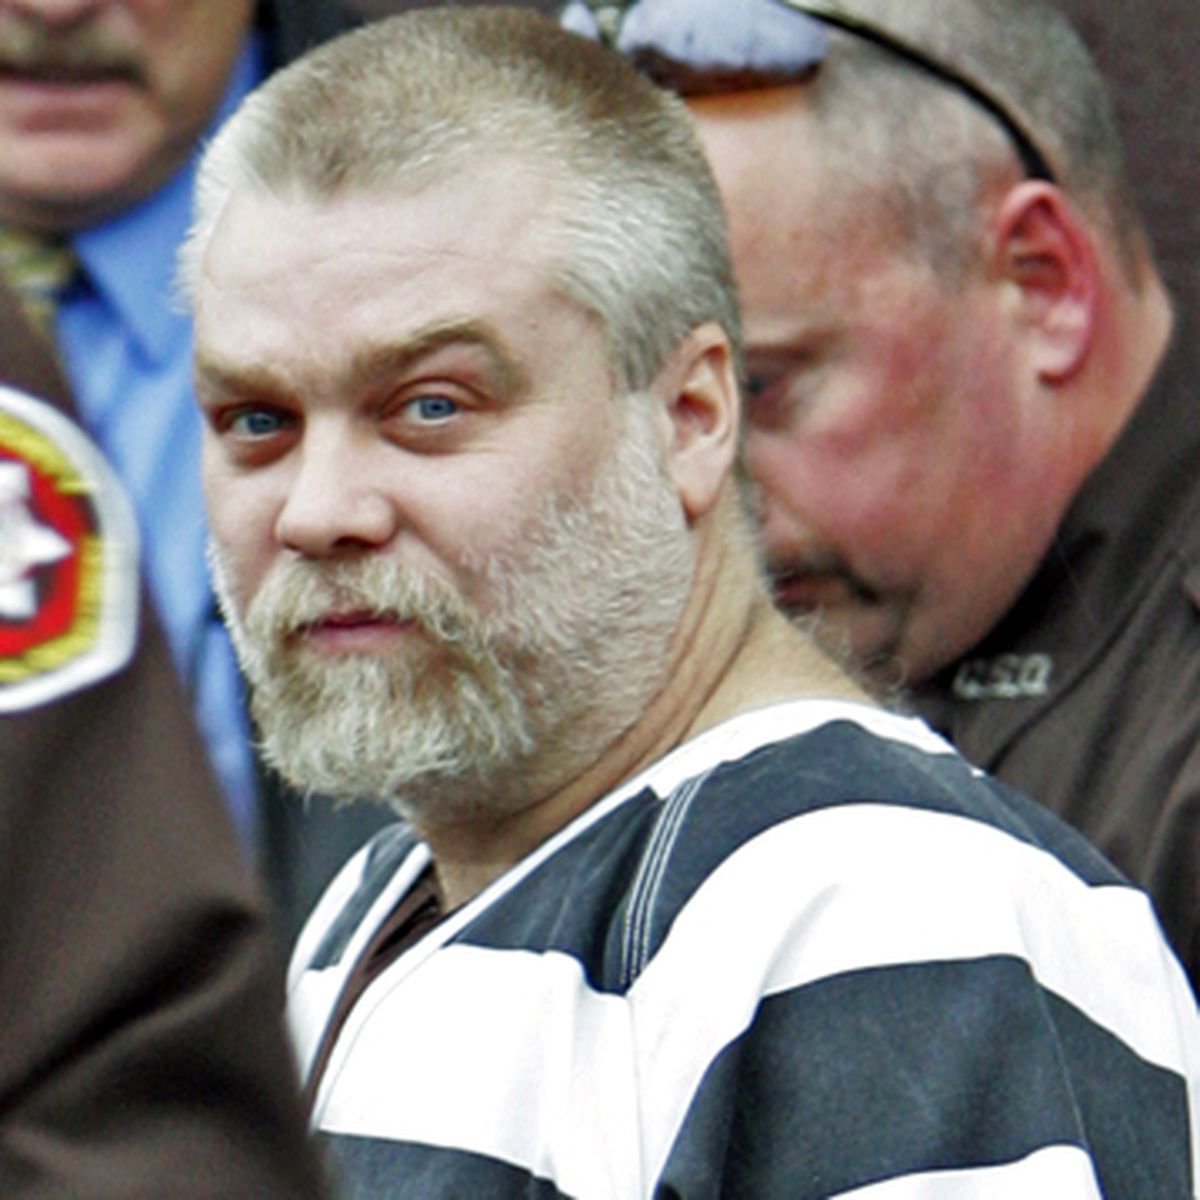 Could online 'slacktivists' actually help Making a Murderer's Steven Avery?